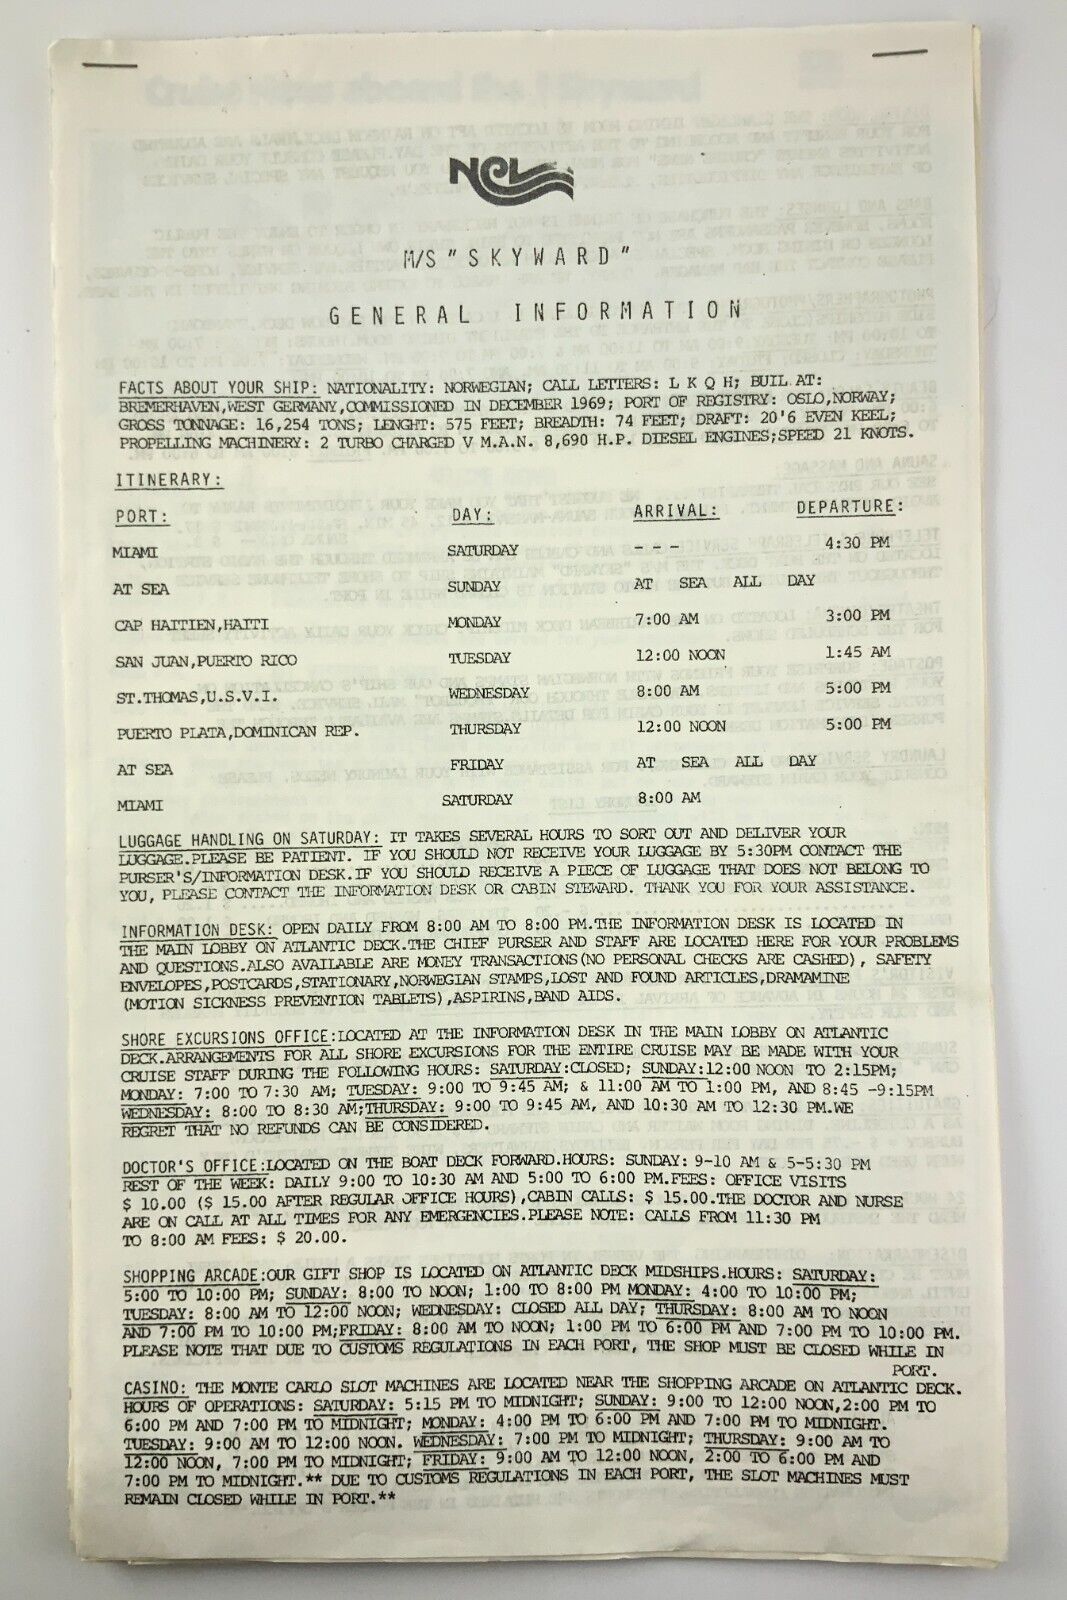 MS Skyward General Information Cruise News 1977 Travel Itinerary EE653